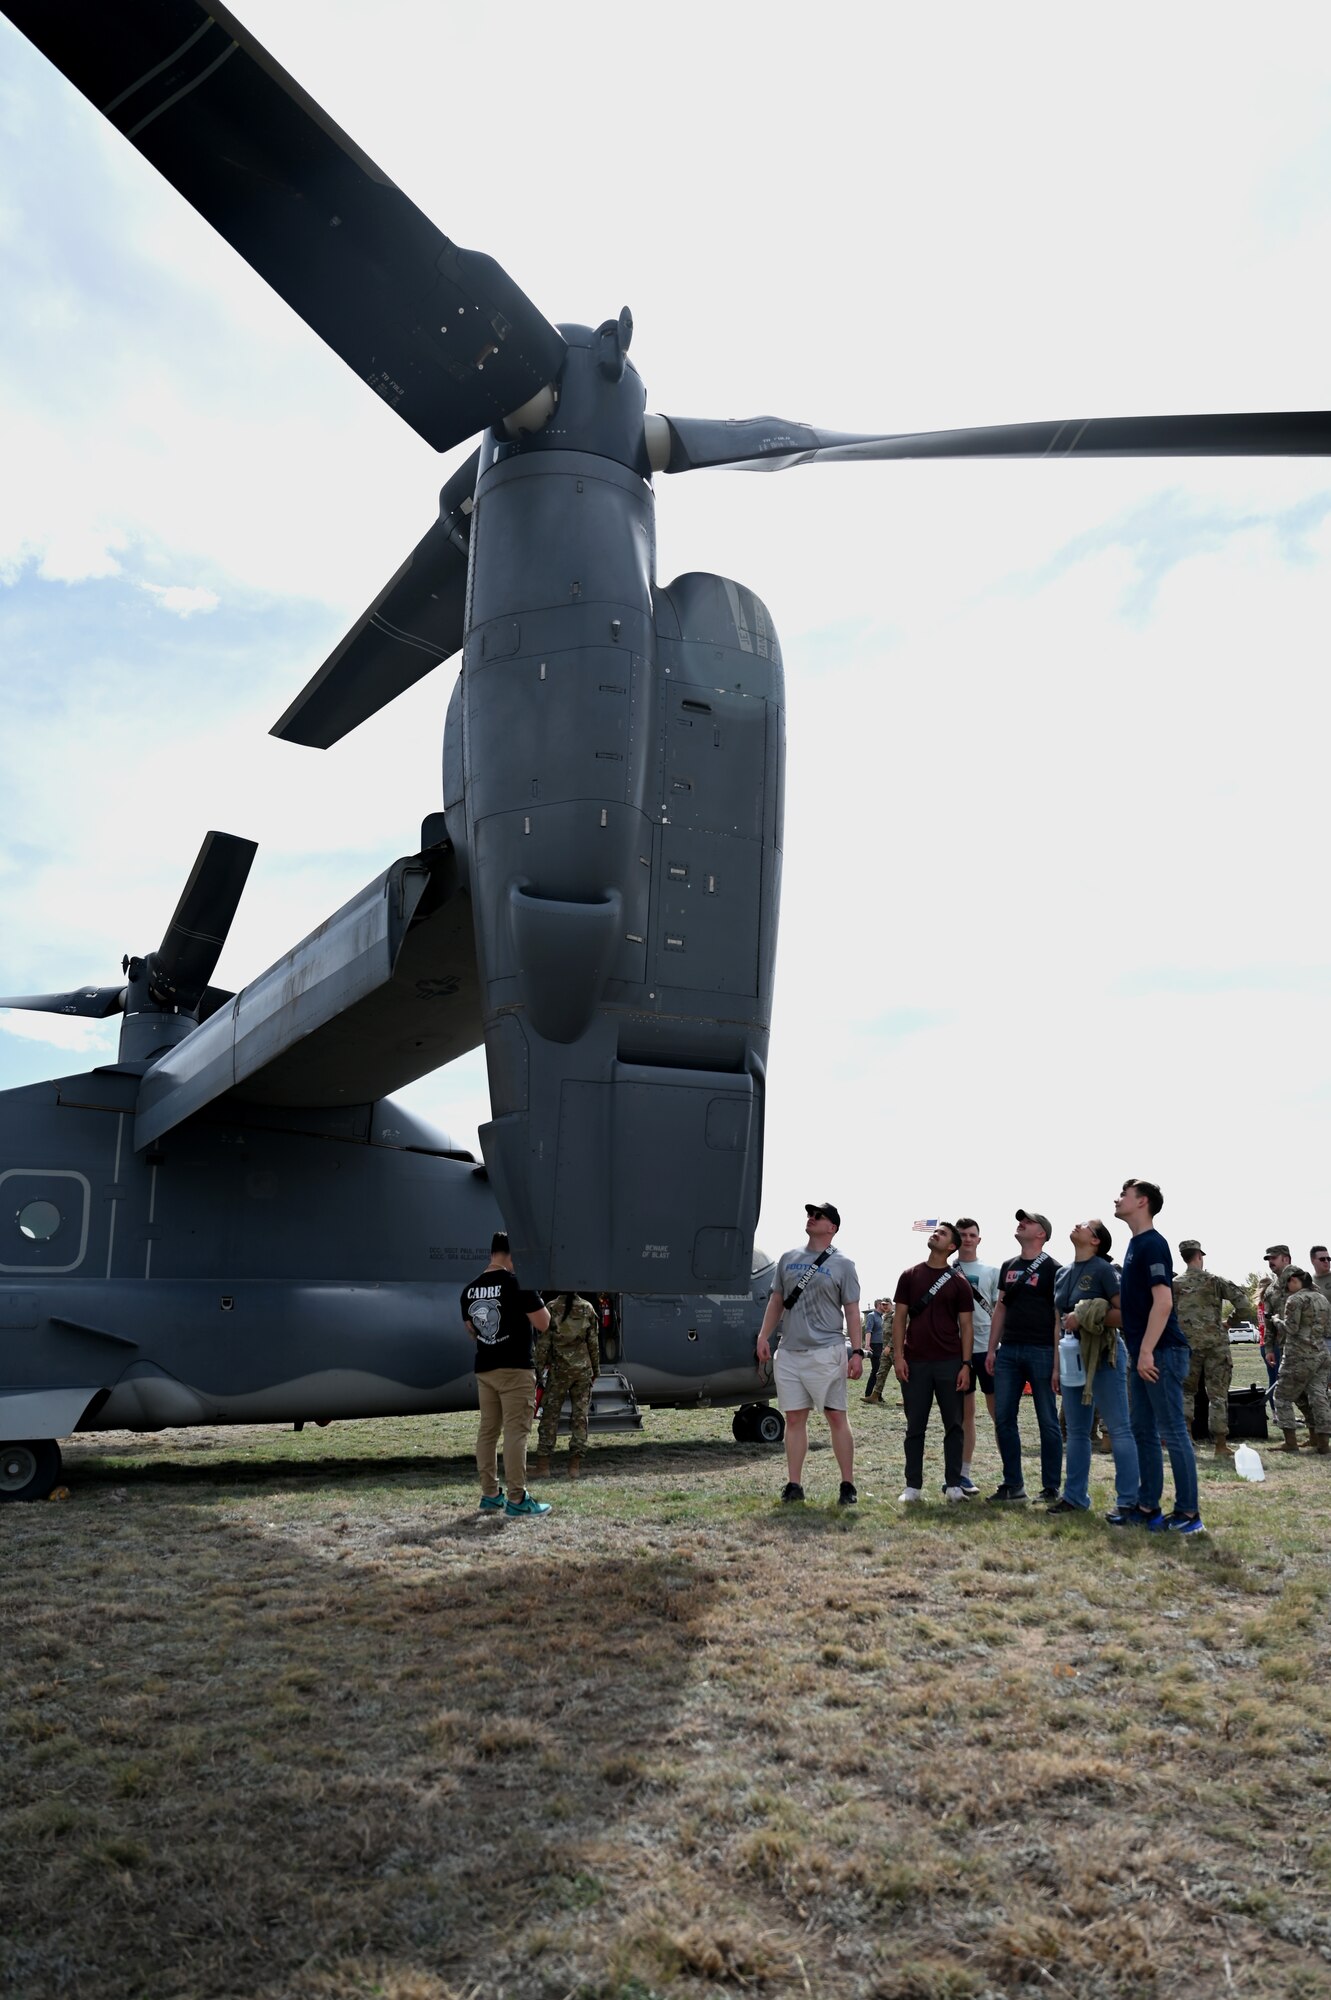 Students assigned to the 316th Training Squadron examine the CV-22 Osprey at Goodfellow Air Force Base, Texas, Mar. 16, 2023. The Osprey flew in from Cannon Air Force Base, N.M., to give 17th Training Wing students the opportunity to have a hands-on demonstration of one of the many airframes they will have the ability to work with once graduating technical training. (U.S. Air Force photo by Airman 1st Class Zachary Heimbuch)